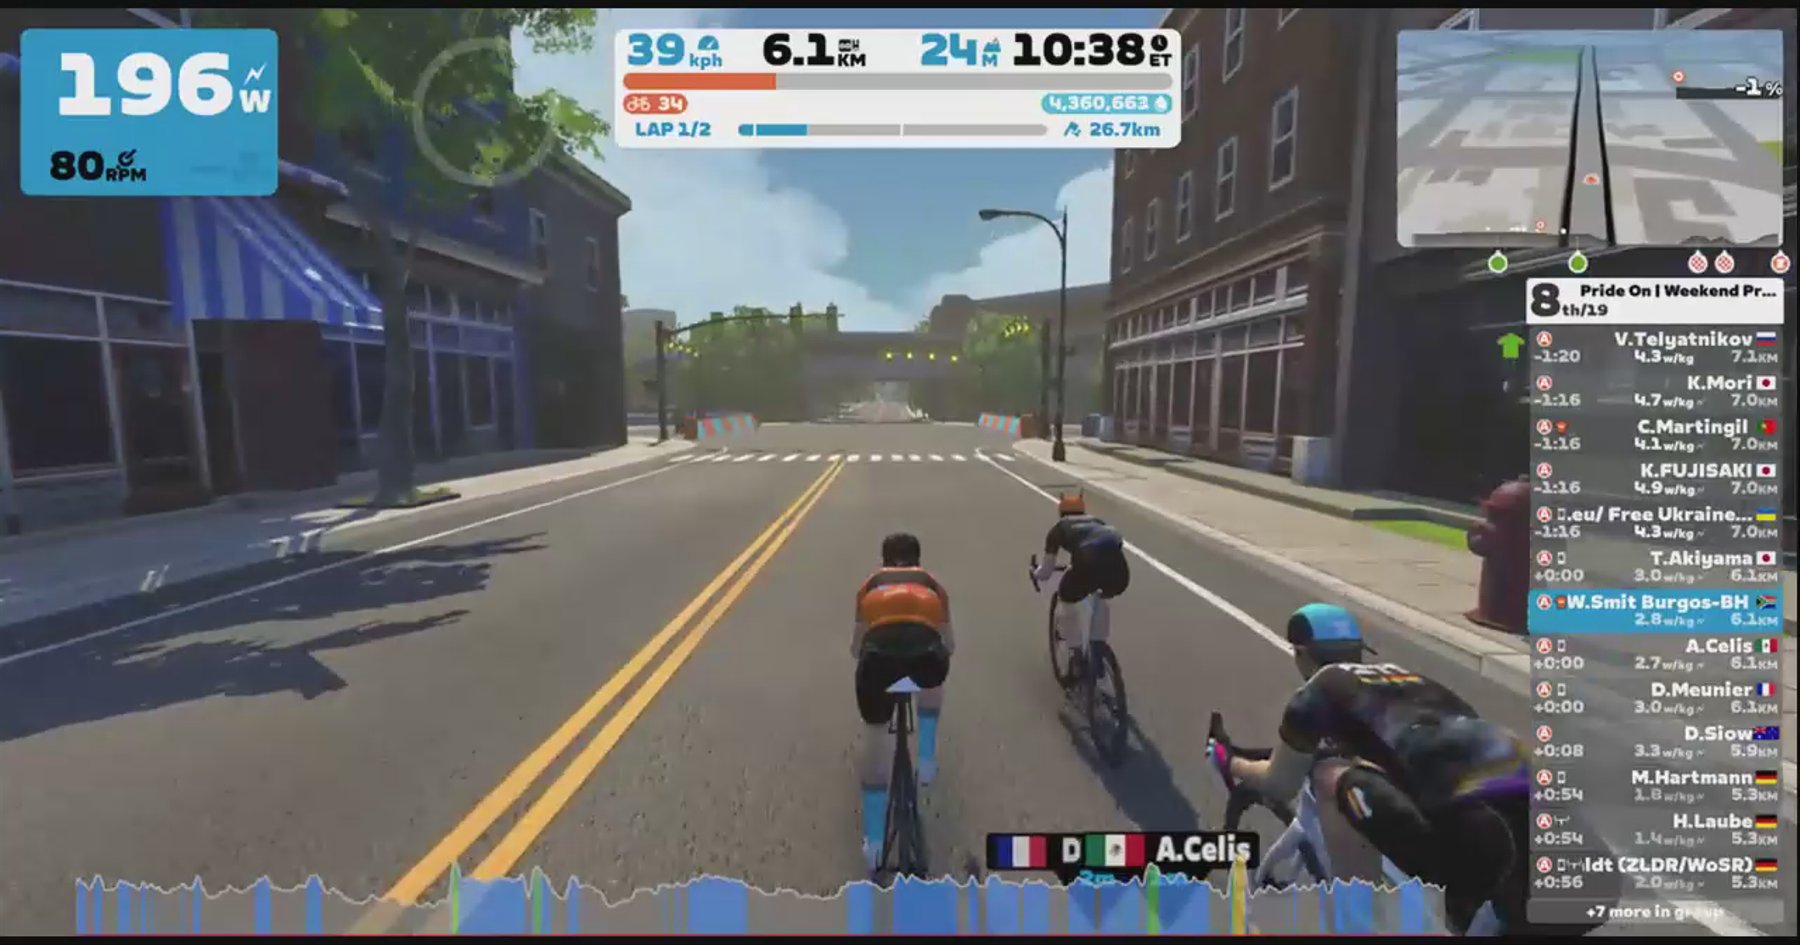 Zwift - Group Ride: Pride On | Weekend Pride Party! 🥳 (A) on 2015 Worlds Course in Richmond